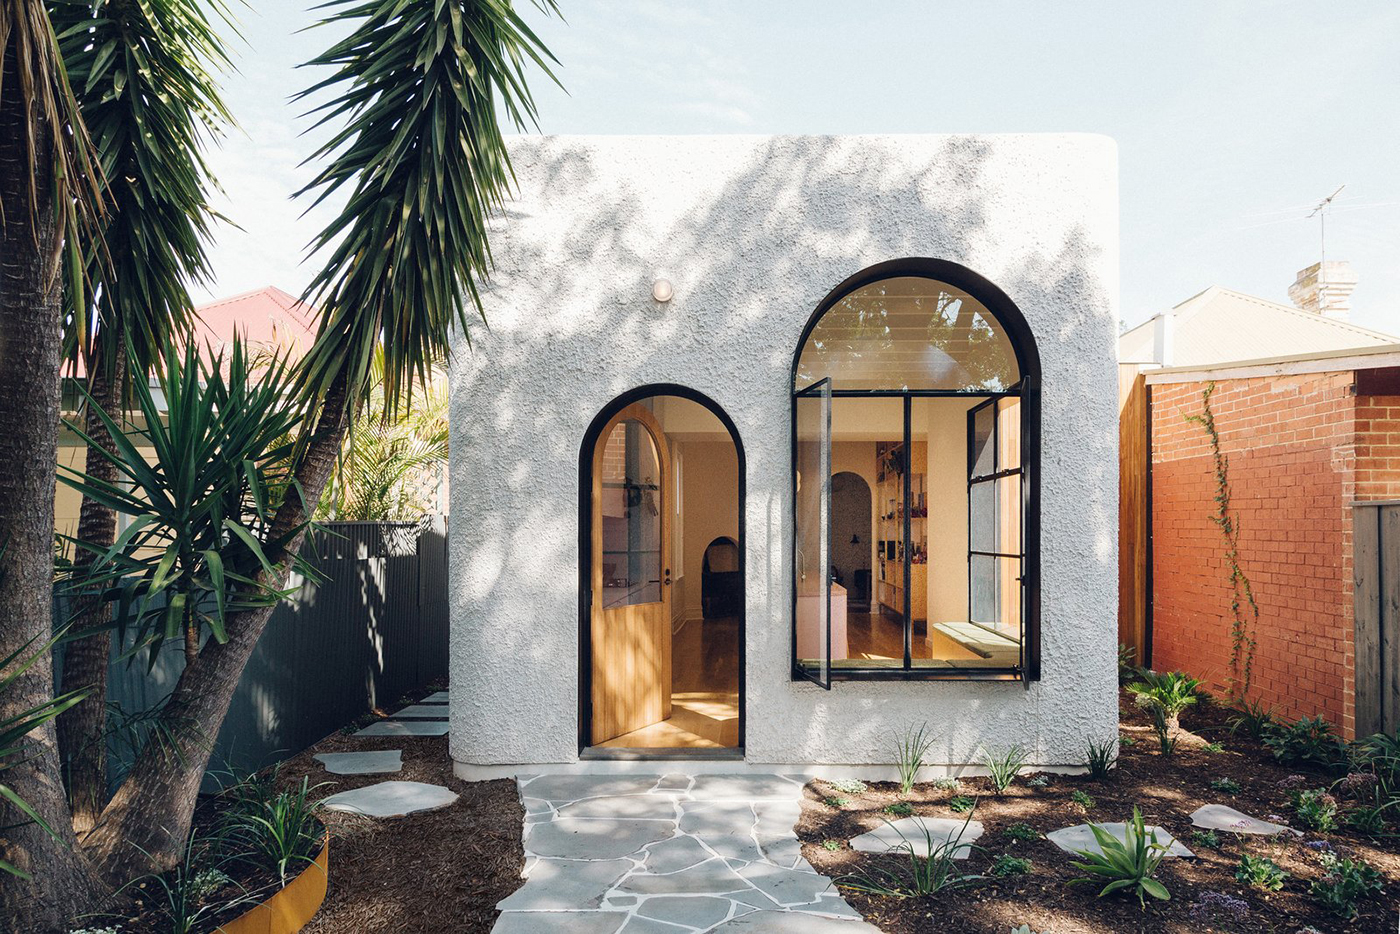 Think about downsizing after viewing the small and incredibly stylish Plaster Fun House, designed by Sans Arc Studio in South Australia.